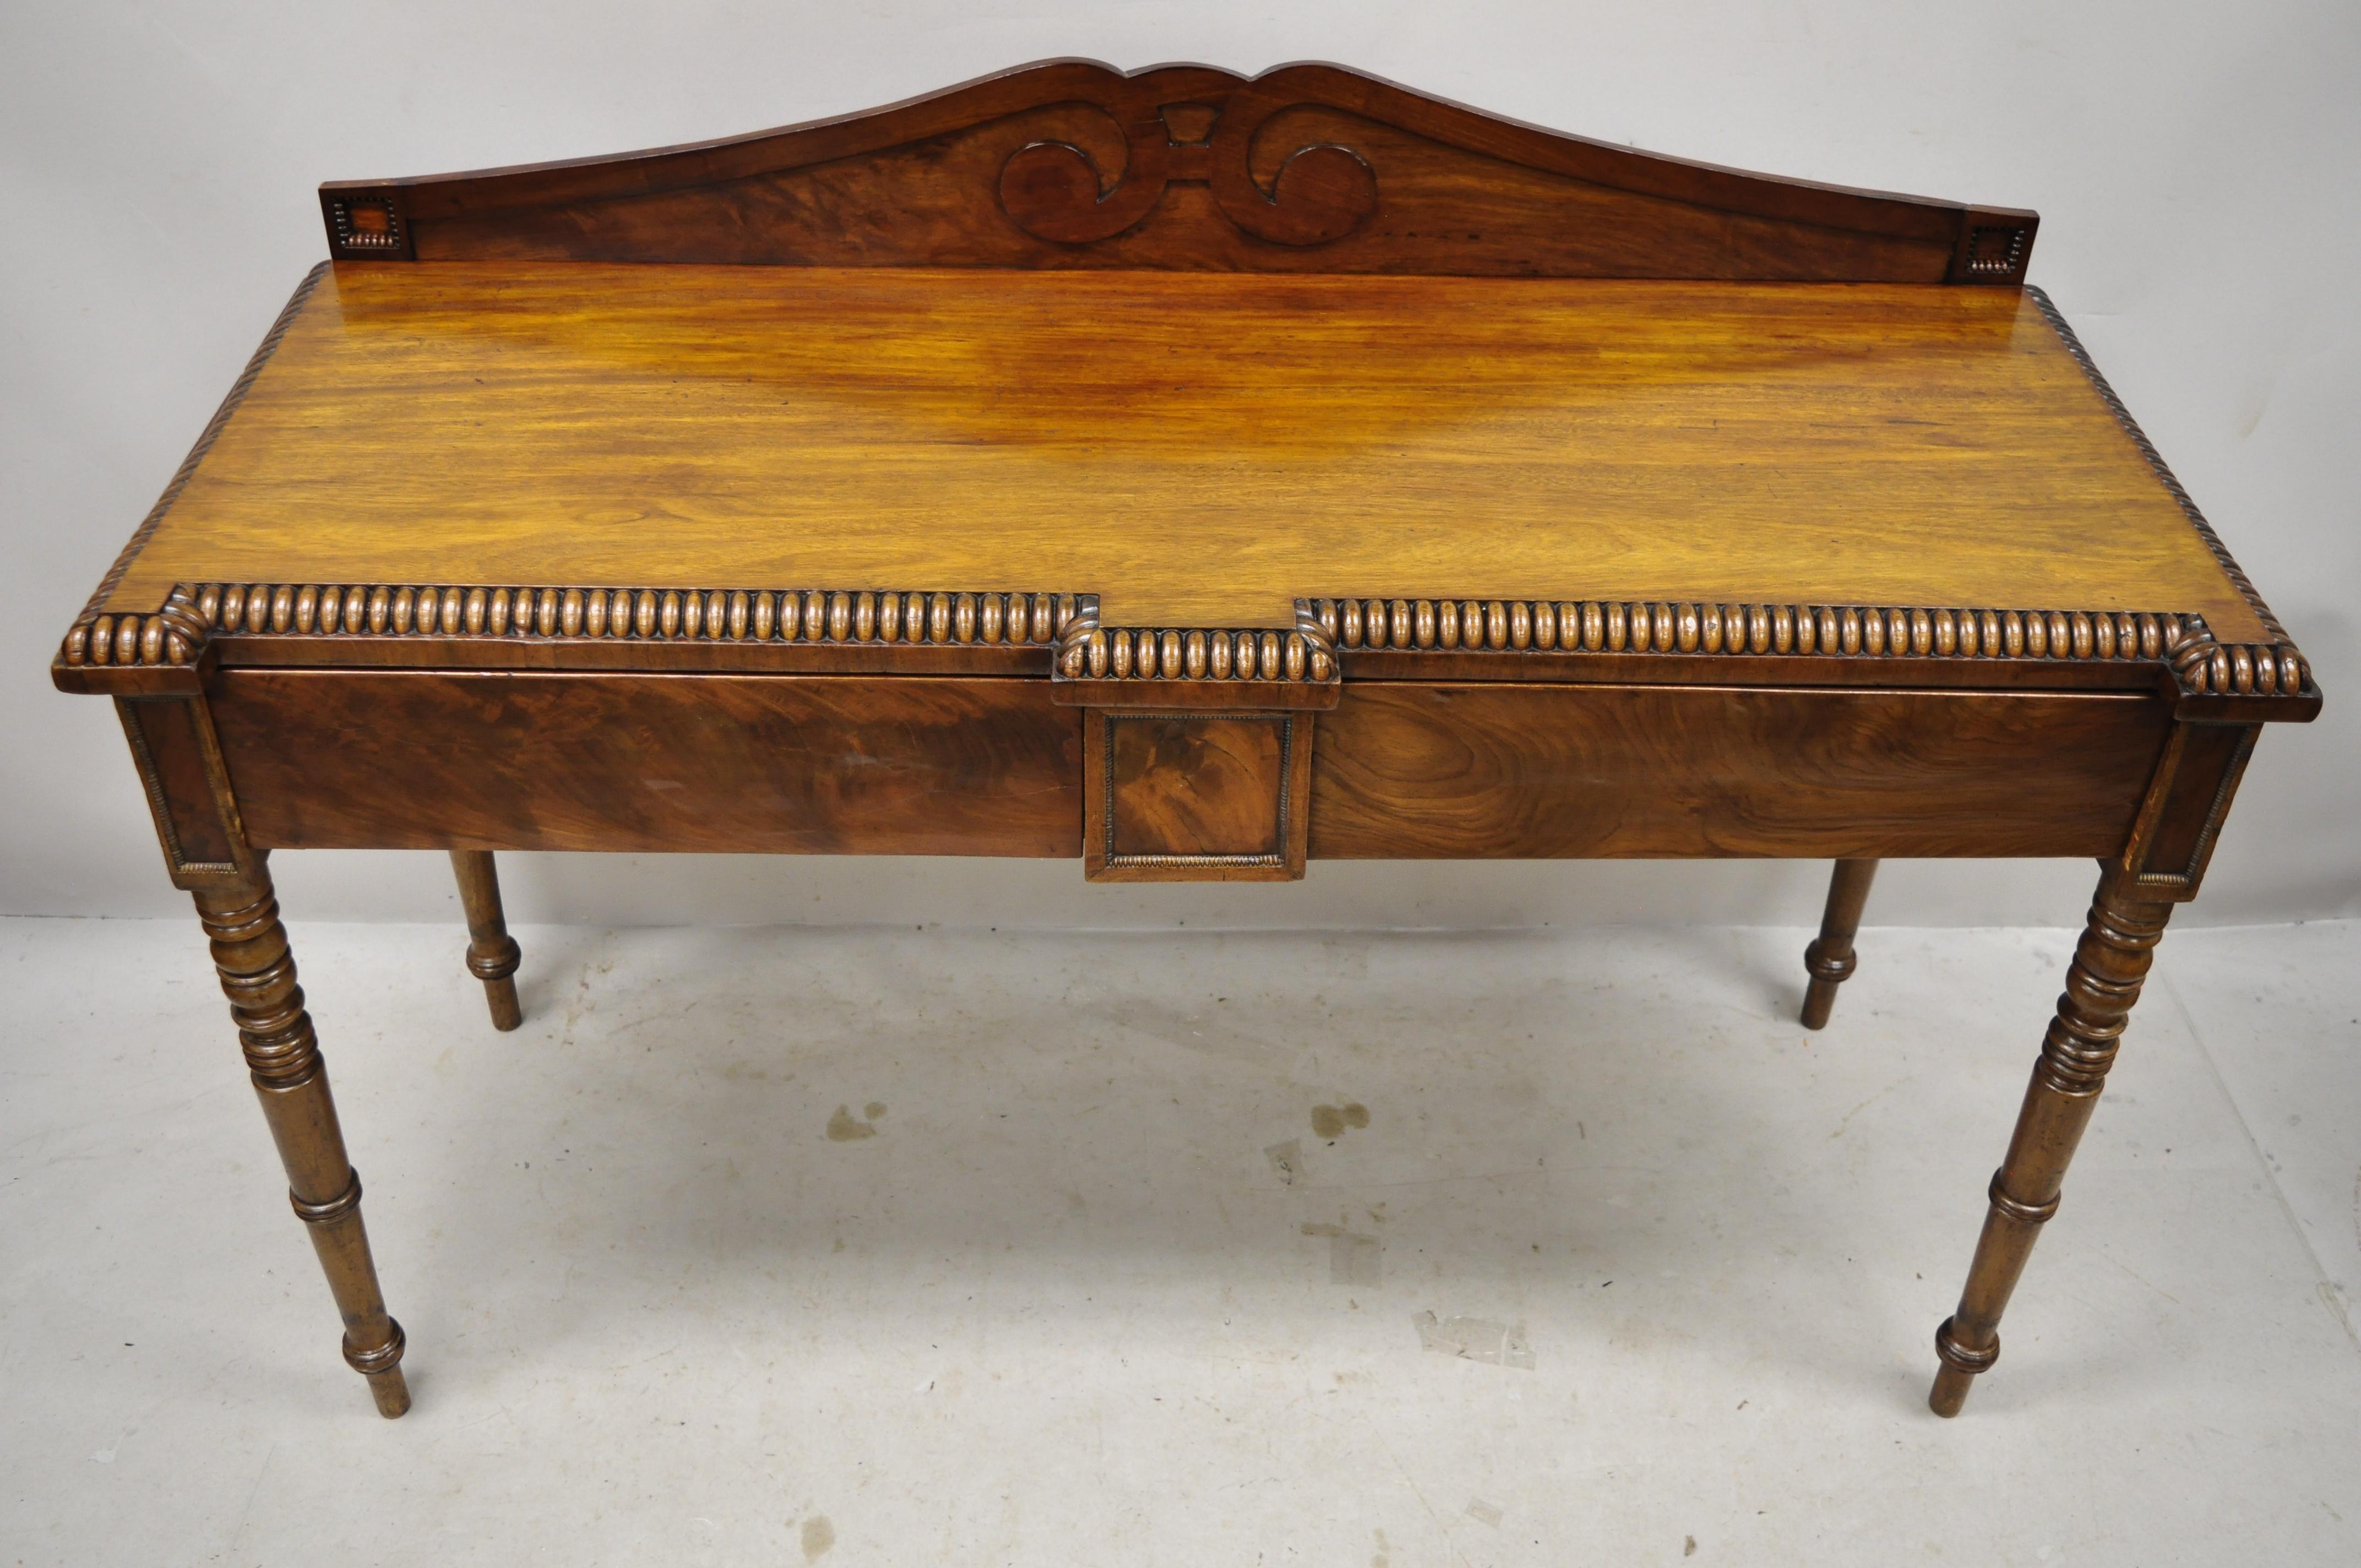 Antique English Regency Crotch Mahogany Rope Carved Sideboard Console Table In Good Condition For Sale In Philadelphia, PA